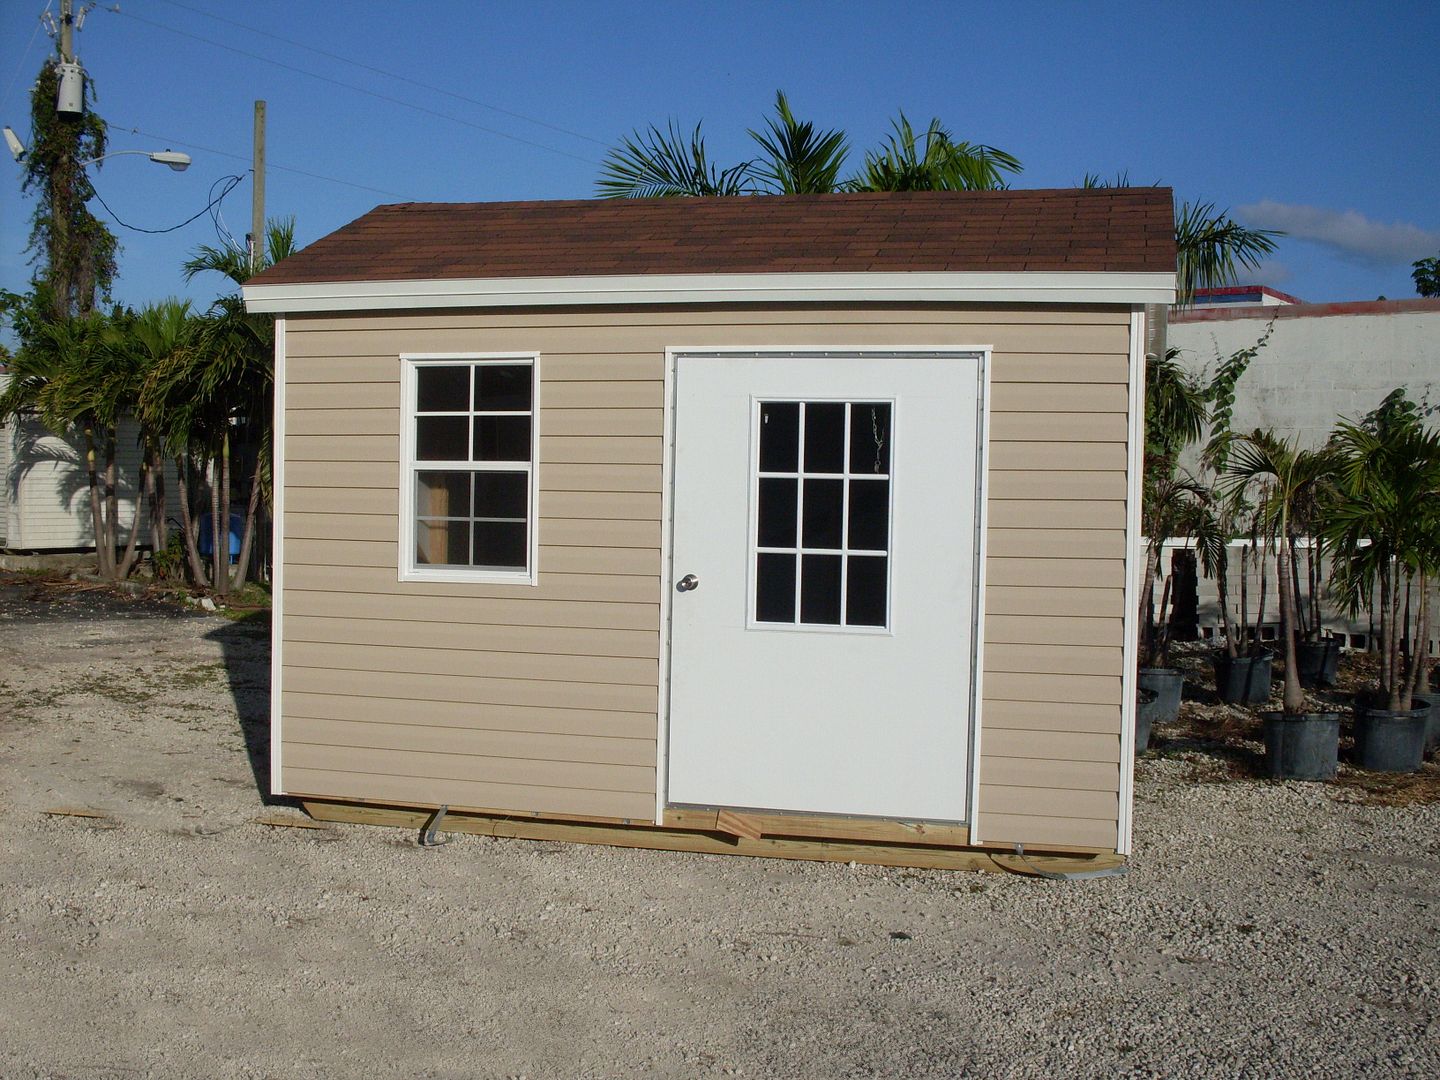 Sale on sheds South florida approved, Dade county approved, Broward 